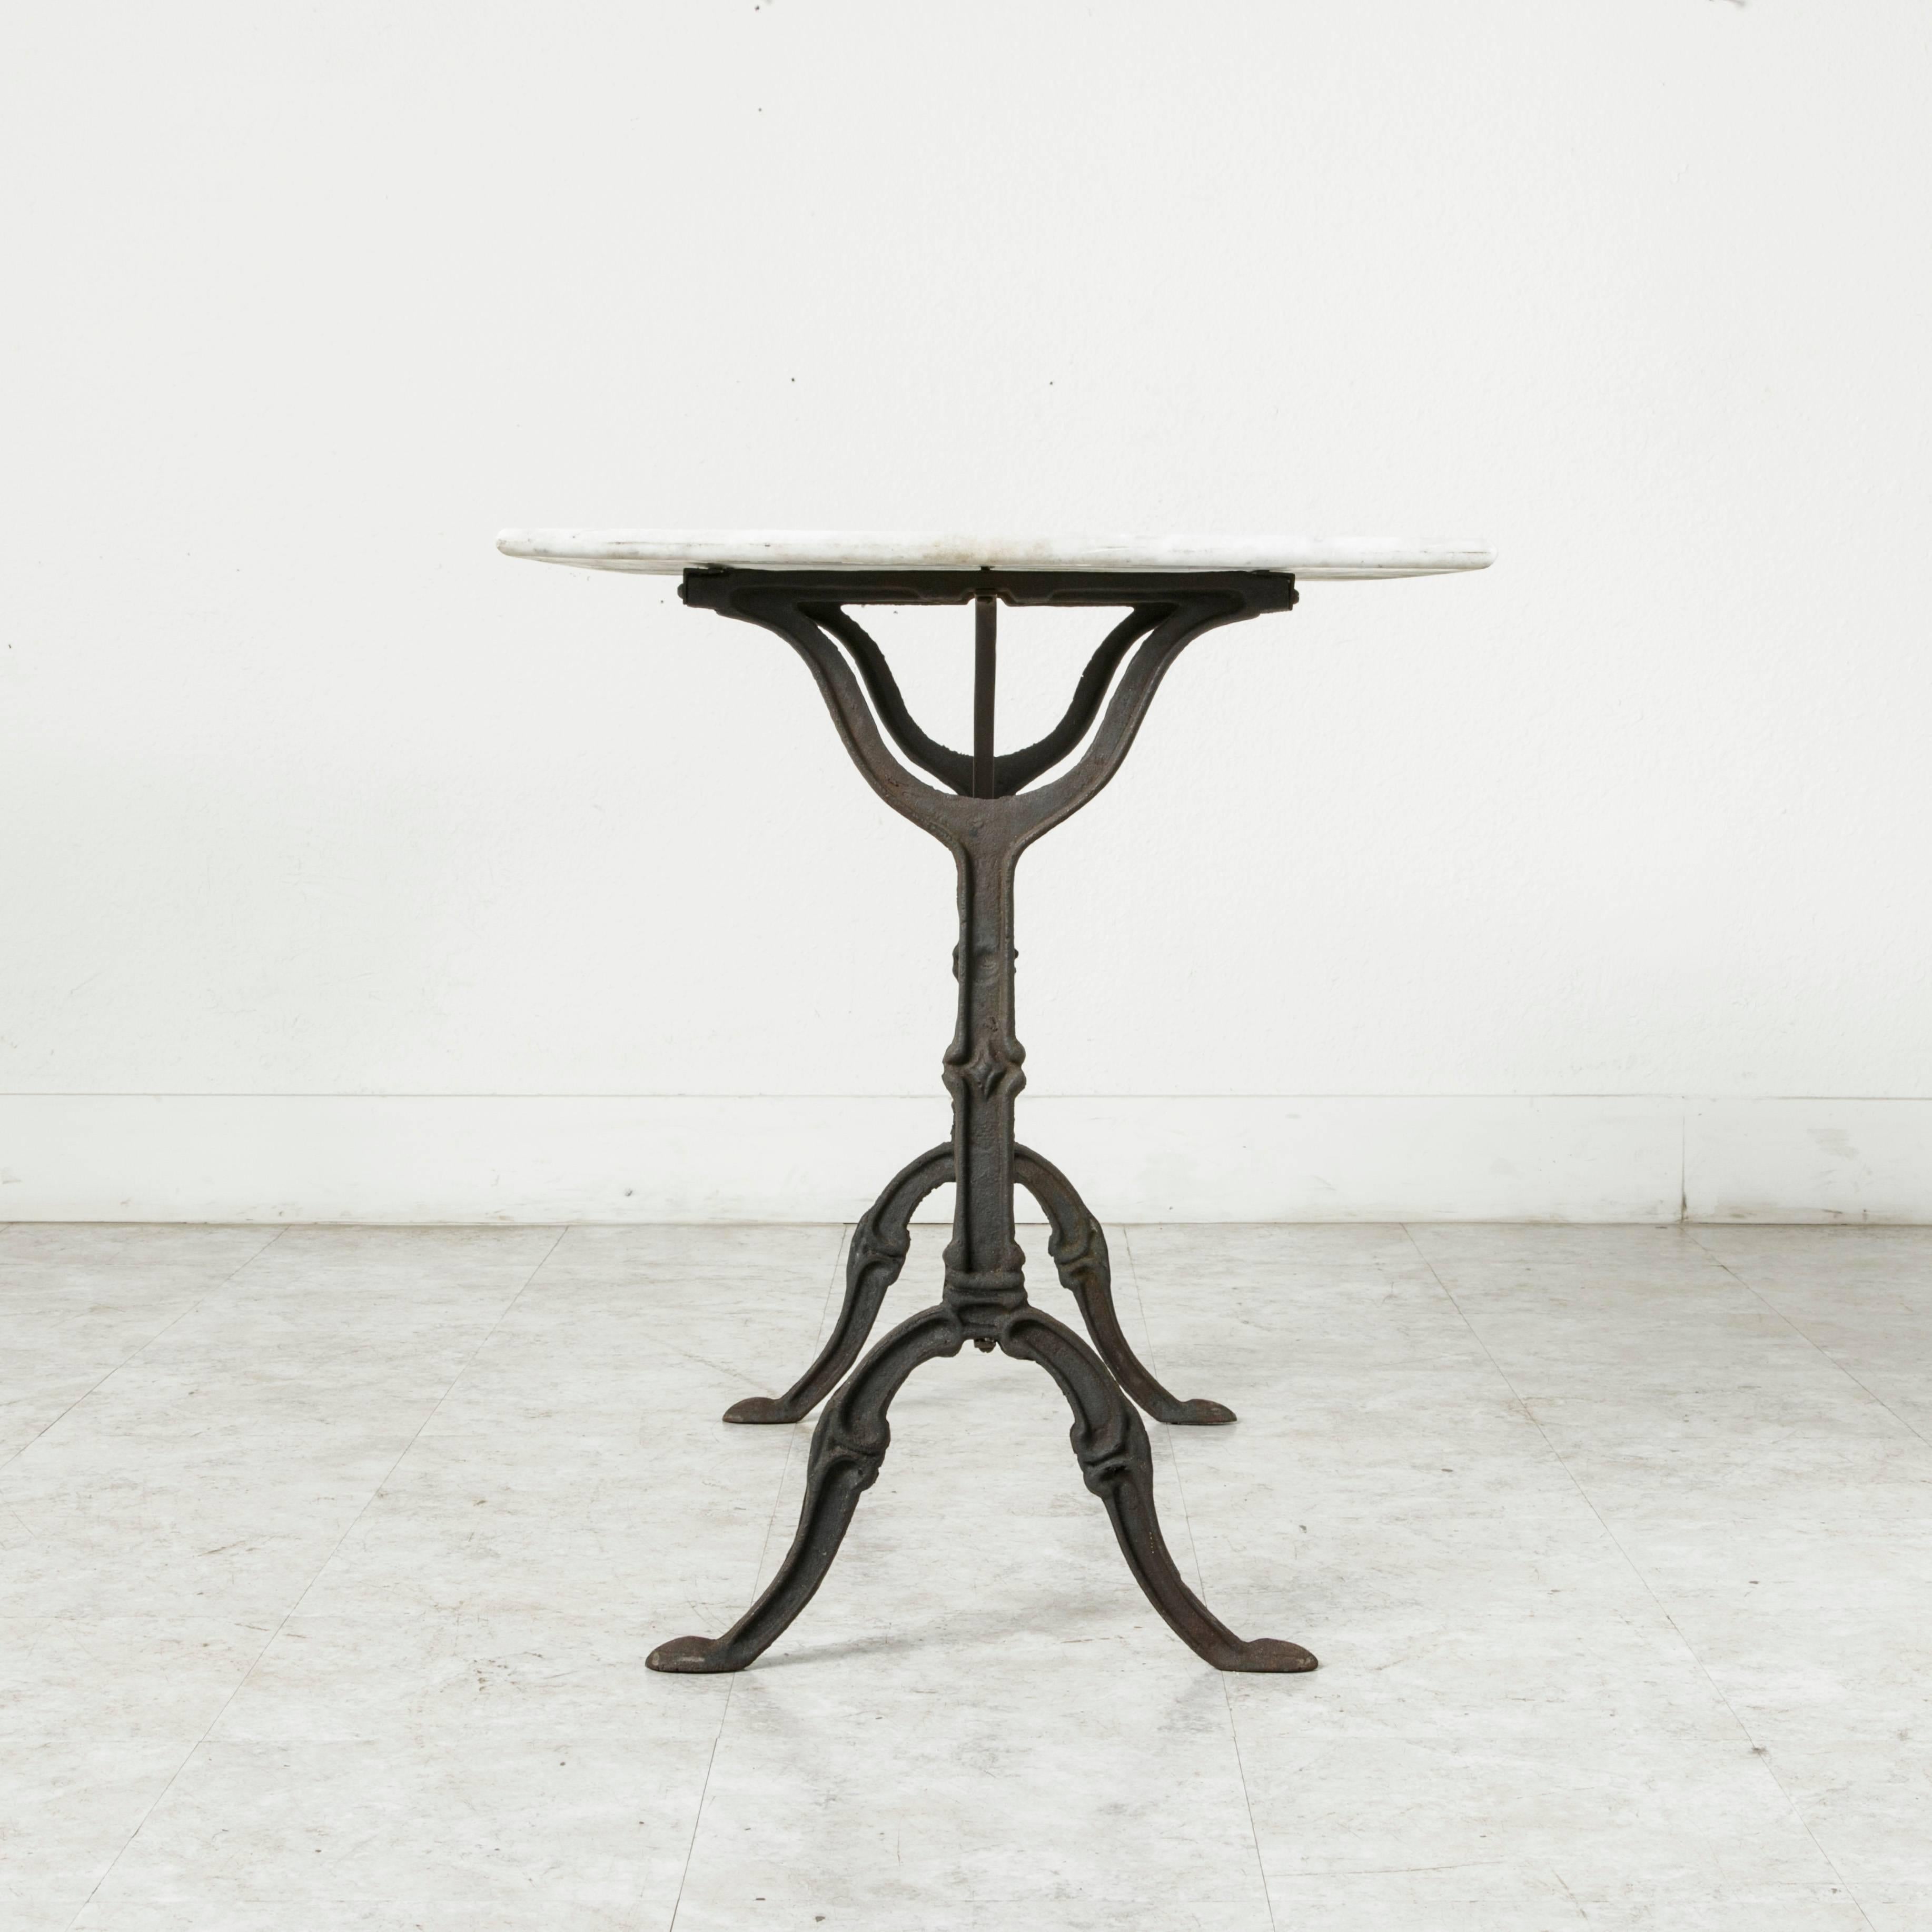 Cast Mid-20th Century Iron Bistro Table, Cafe Table, Garden Table with Marble Top